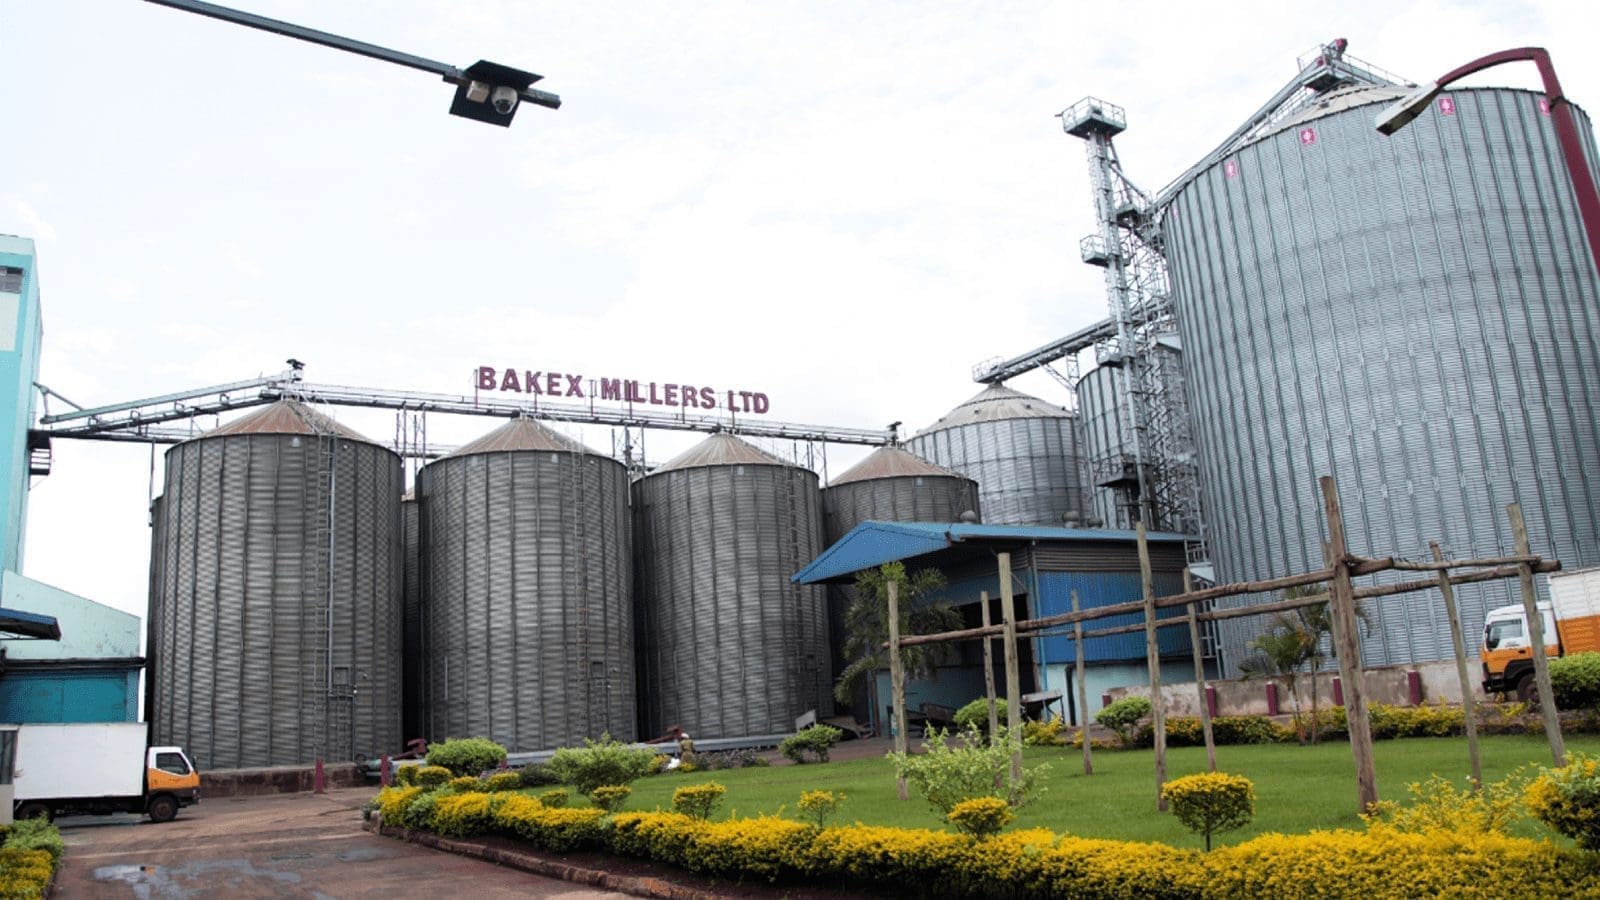 Africa’s milling sector continues to take shape, registering rise in number of players